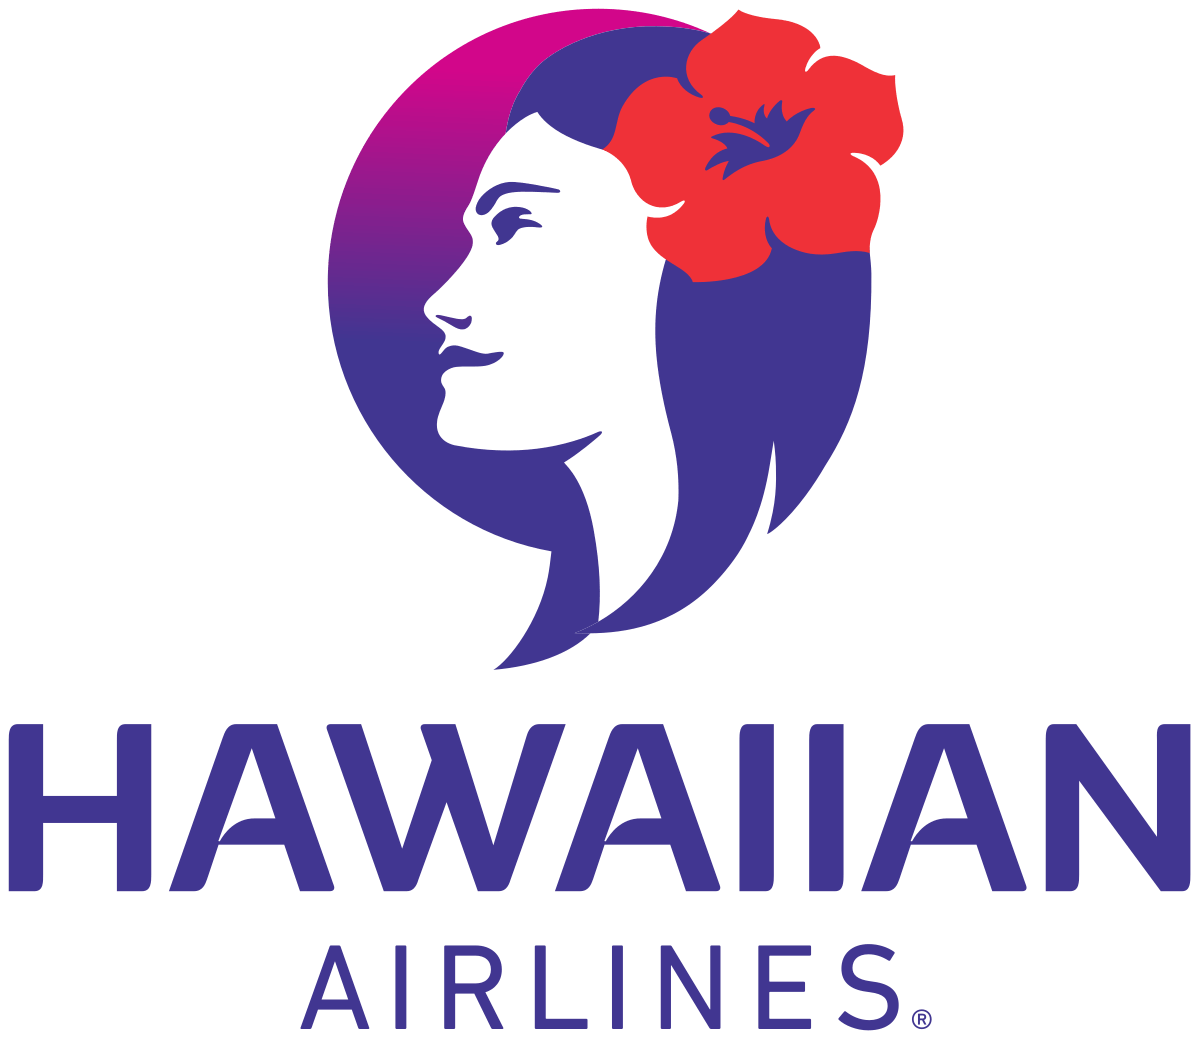 Asia Airlines Logo - Hawaiian Airlines